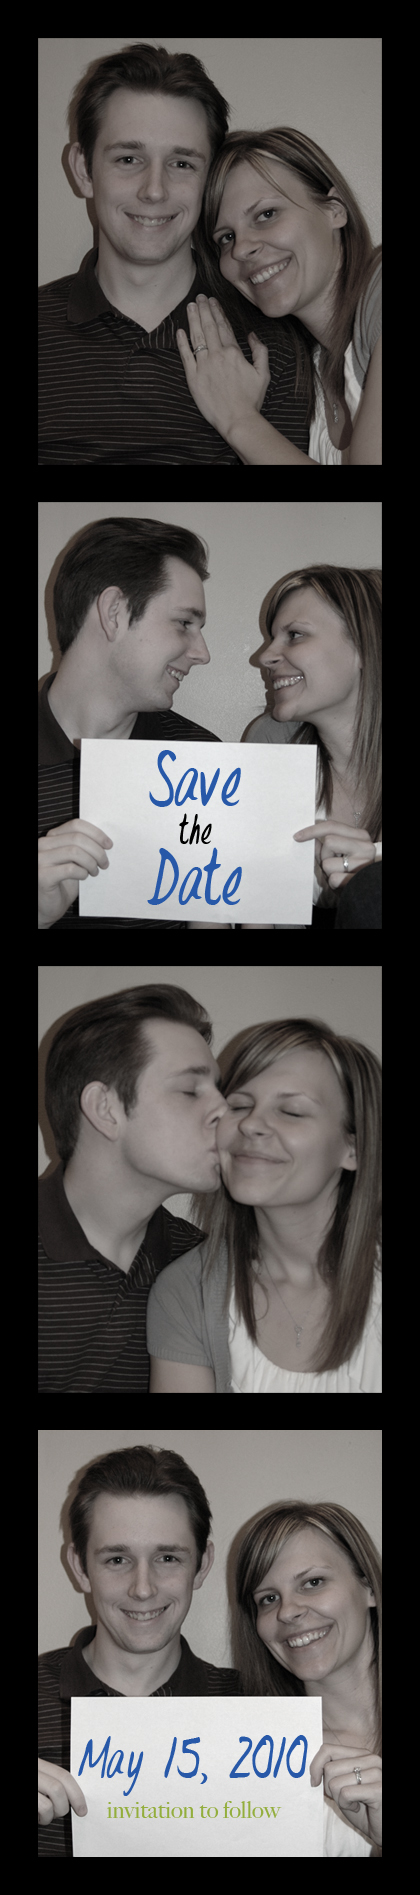 save the date cars 